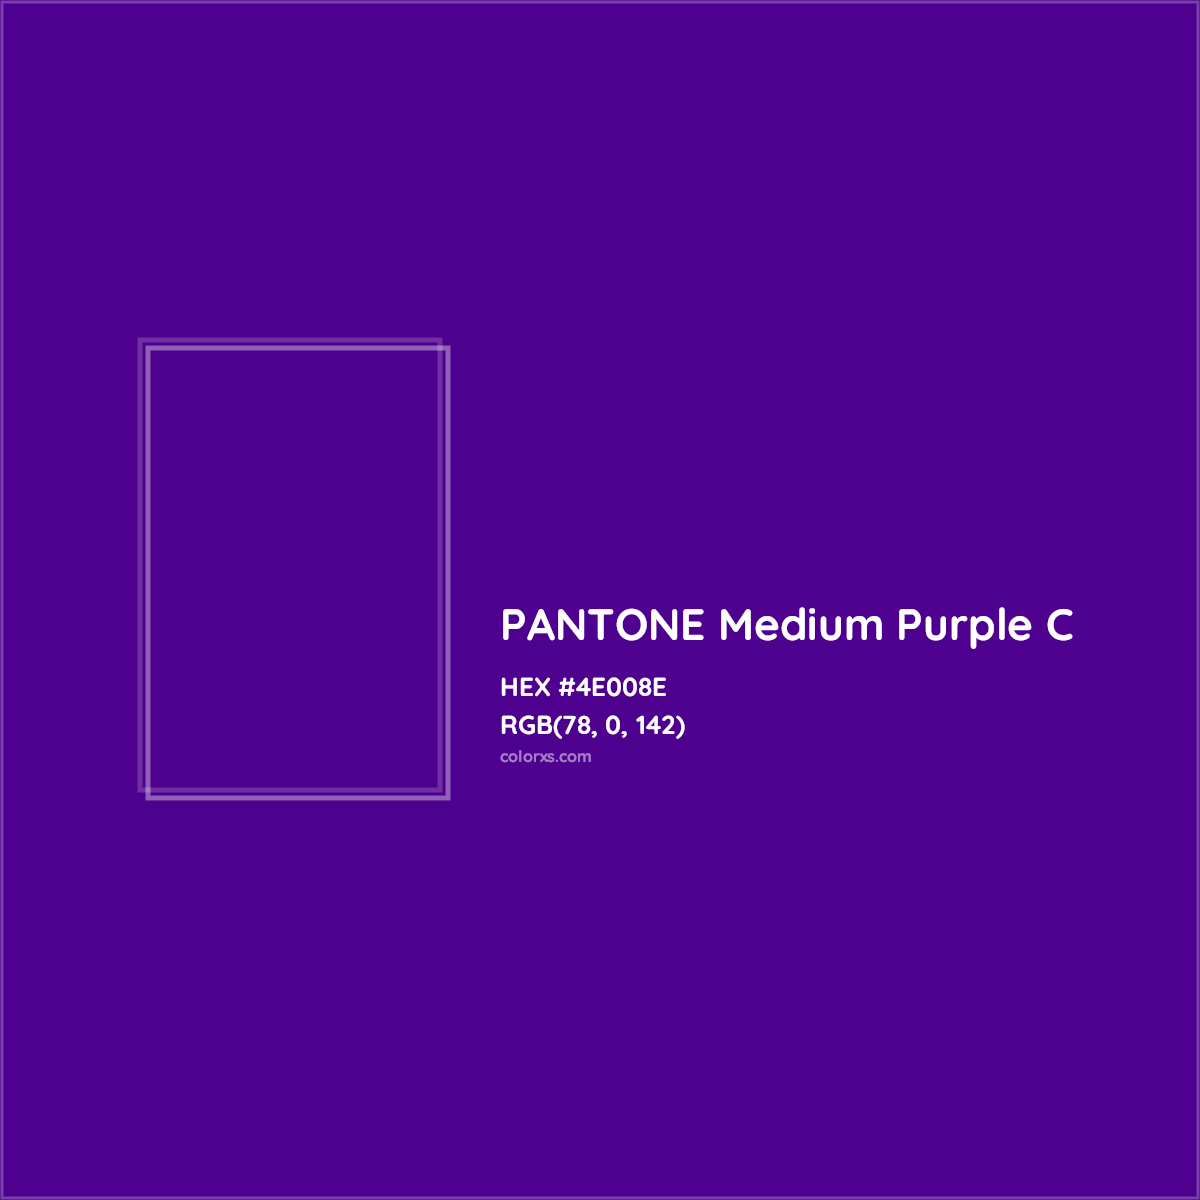 Pantone Medium Purple C Complementary Or Opposite Color Name And Code